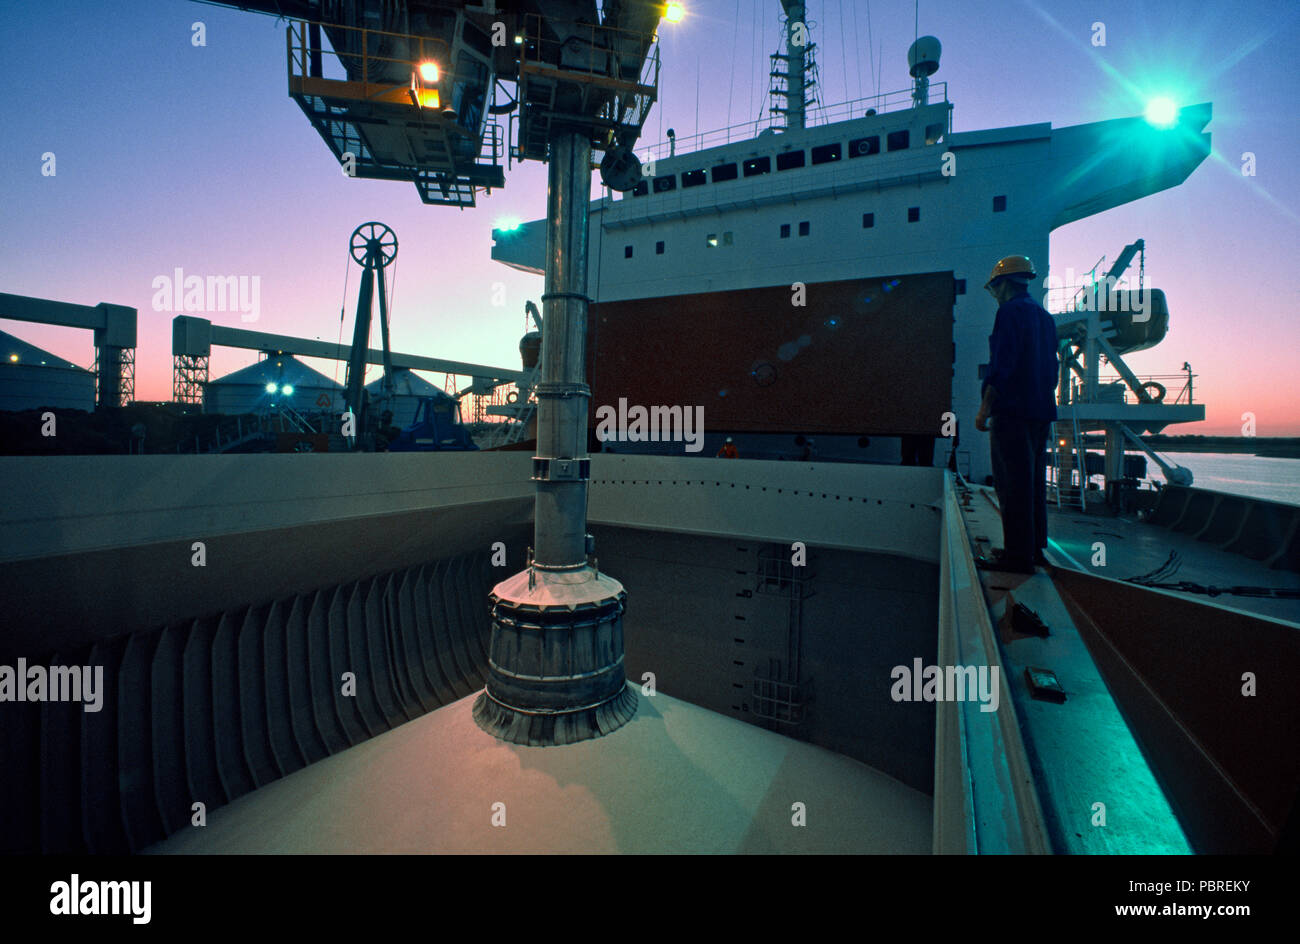 Loading alumina ore in container ship's hold at night, wide angle view Stock Photo